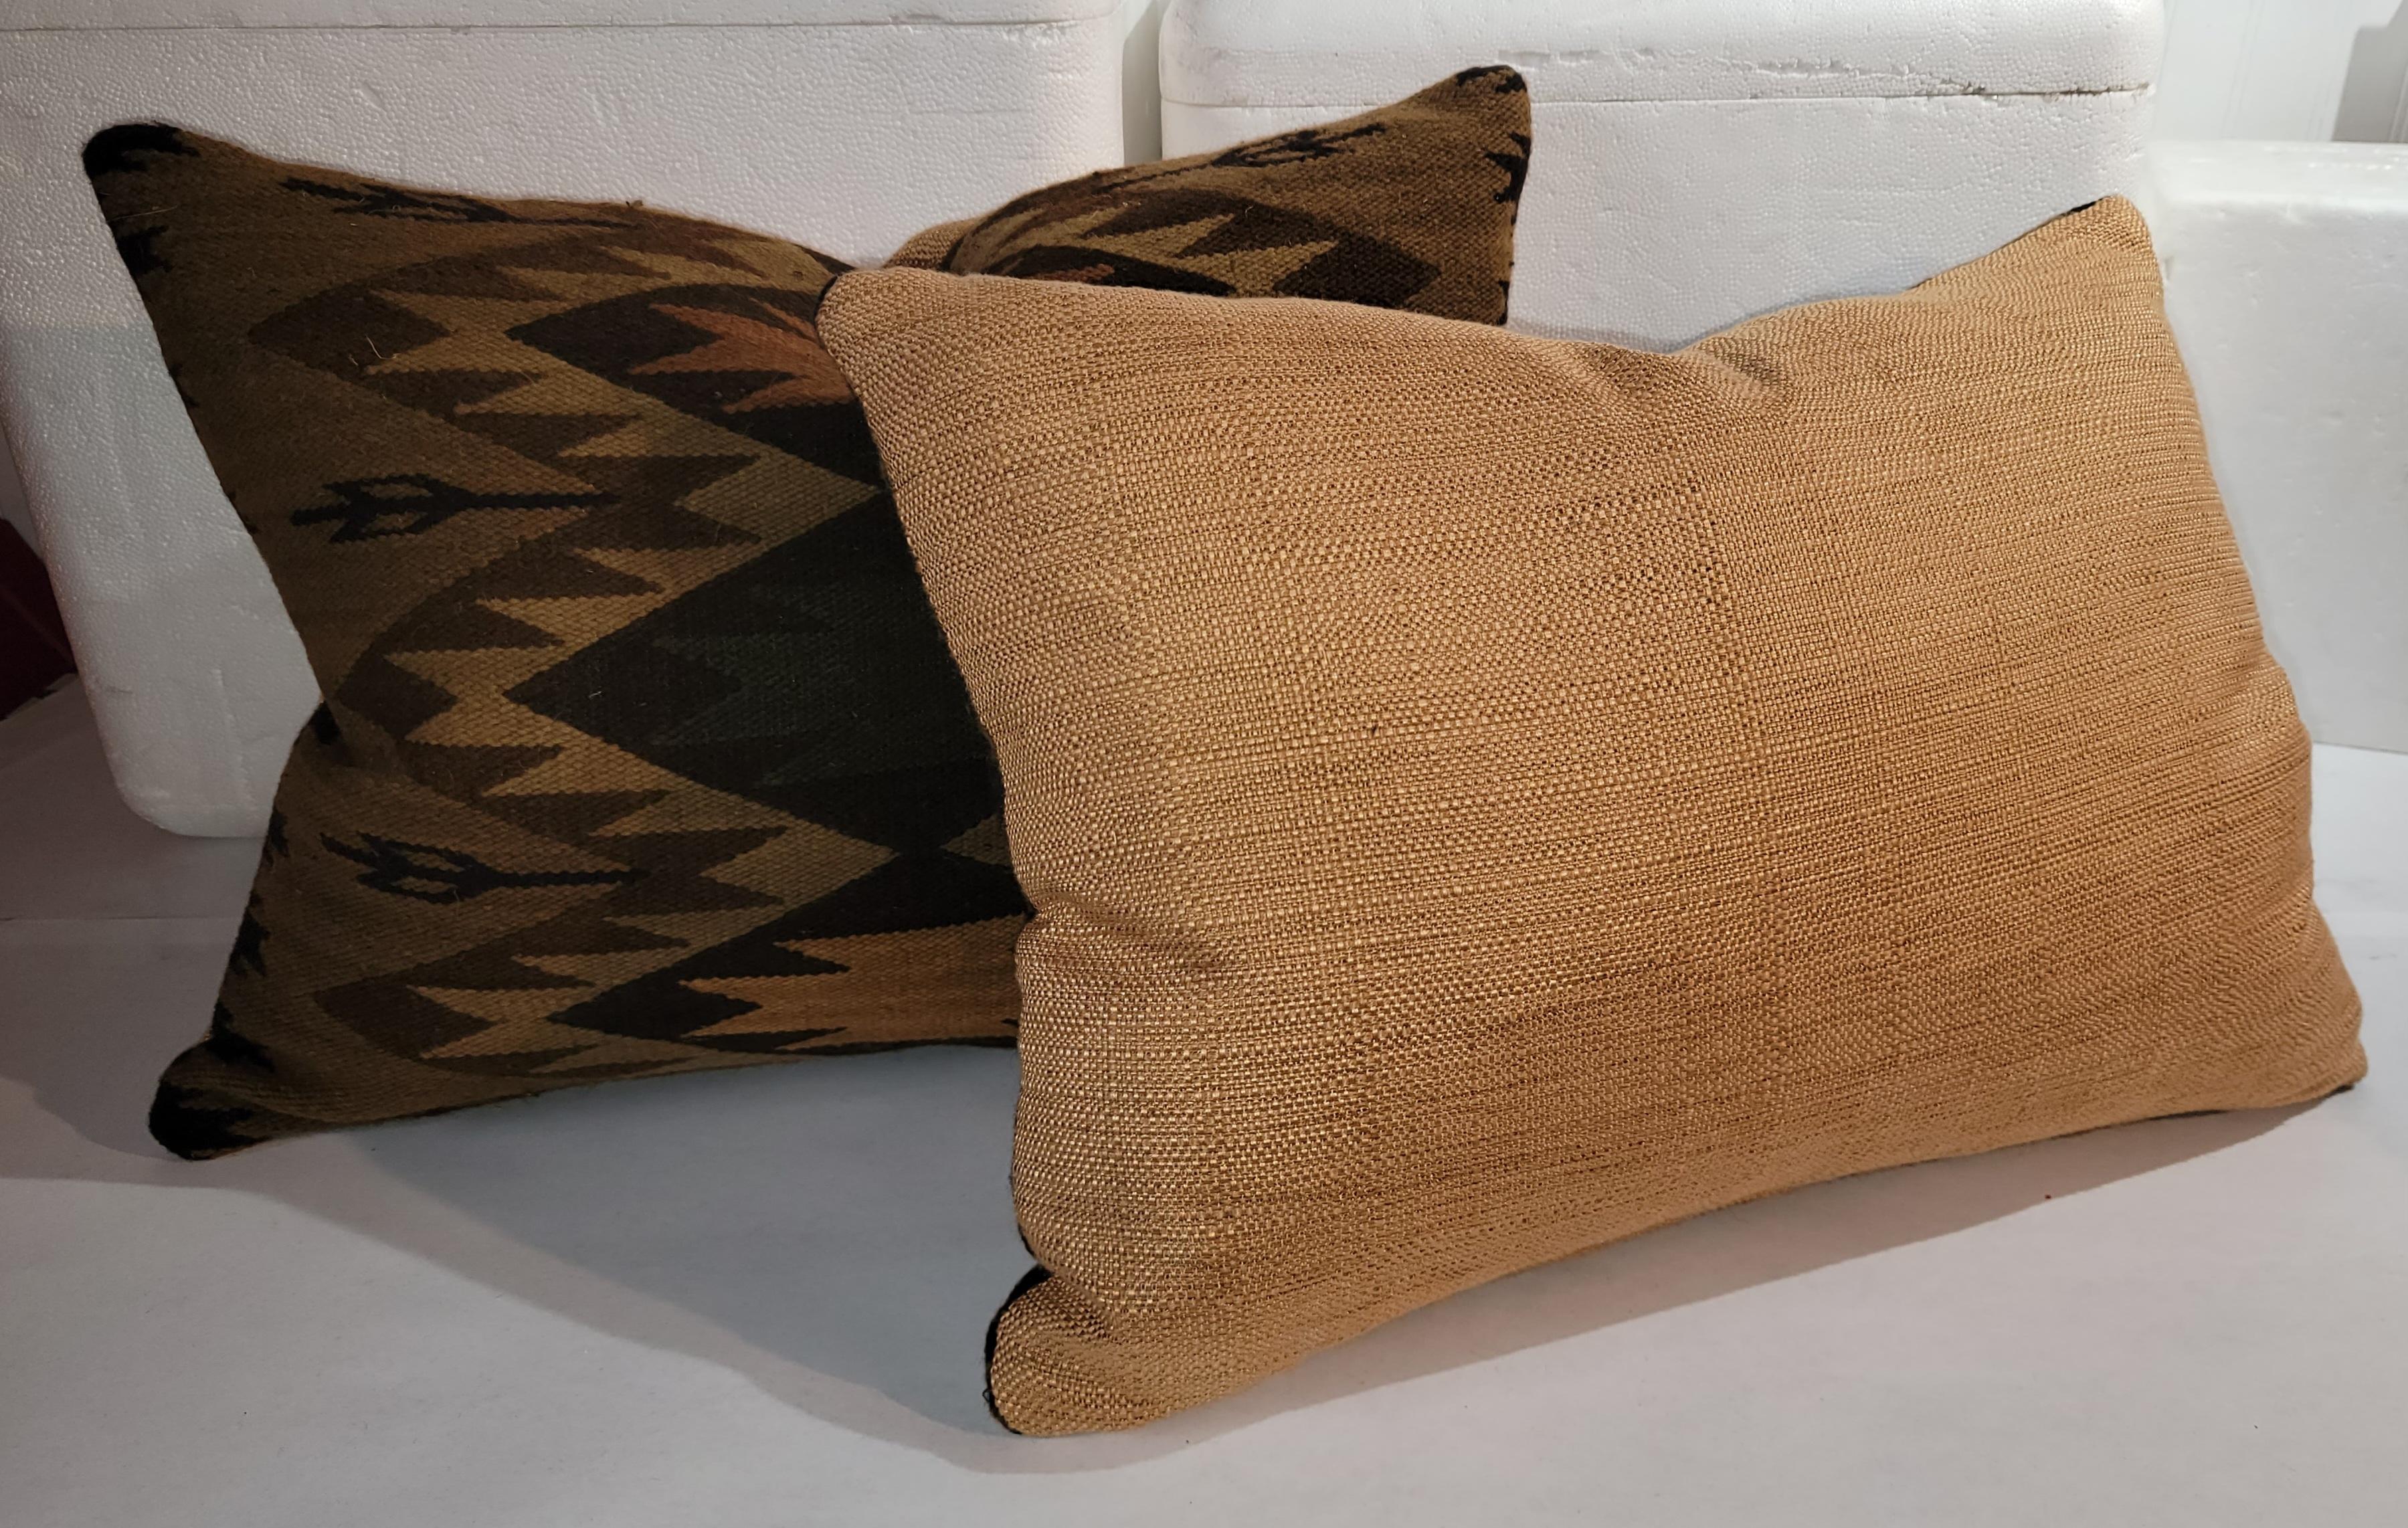 American Early Navajo Indian Weaving Bolster Pillows, Pair For Sale